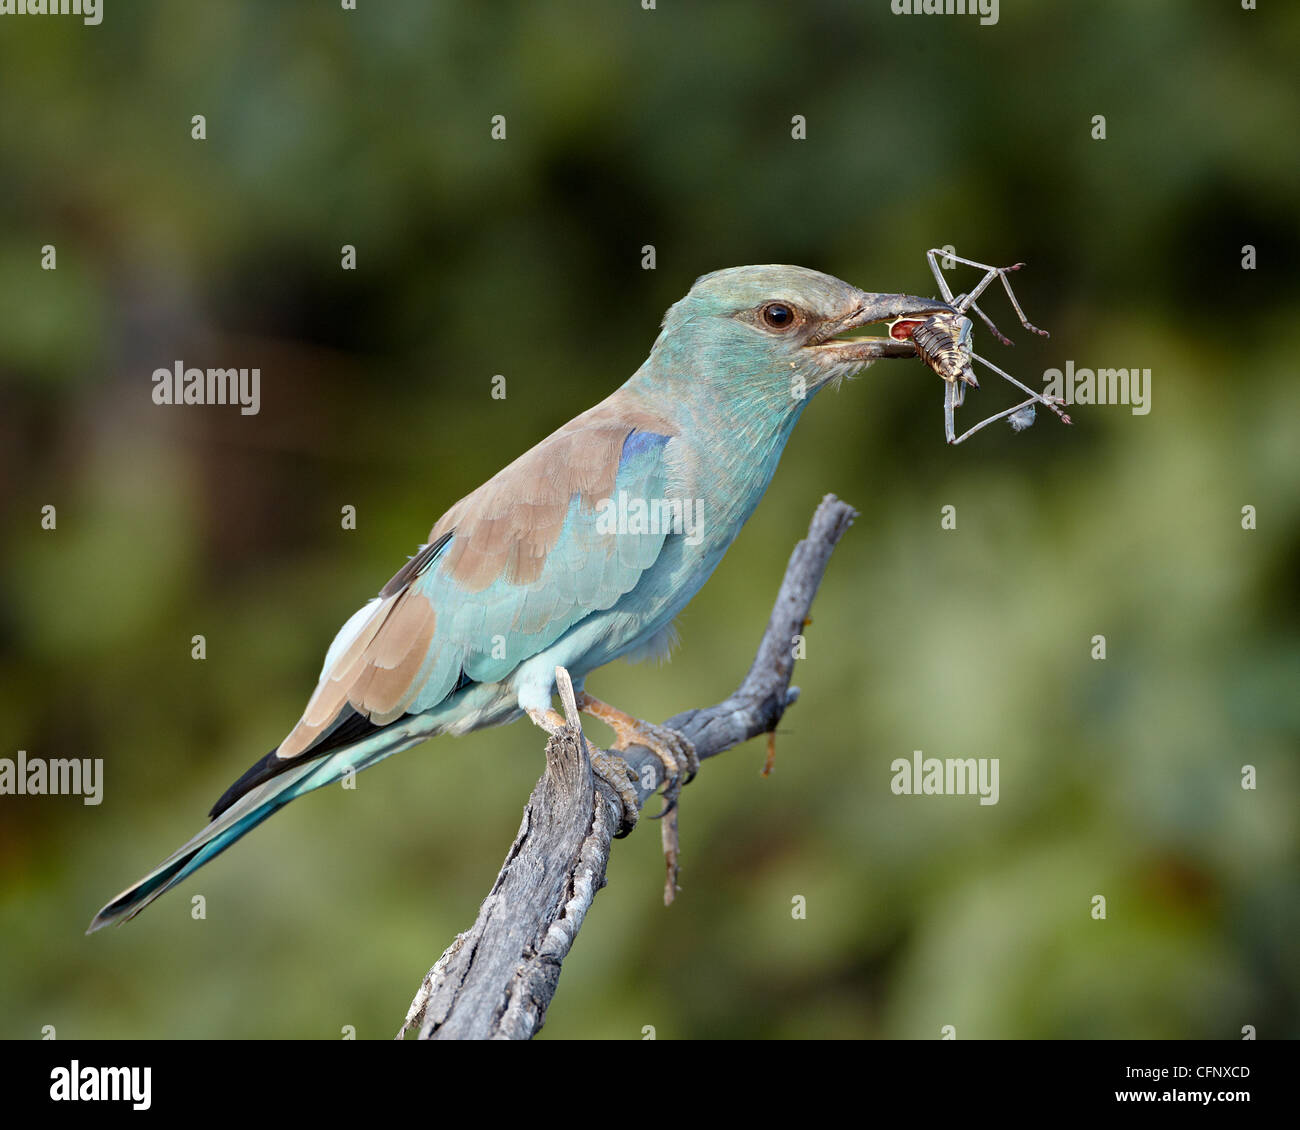 European roller (Coracias garrulus) with an insect, Kruger National Park, South Africa, Africa Stock Photo